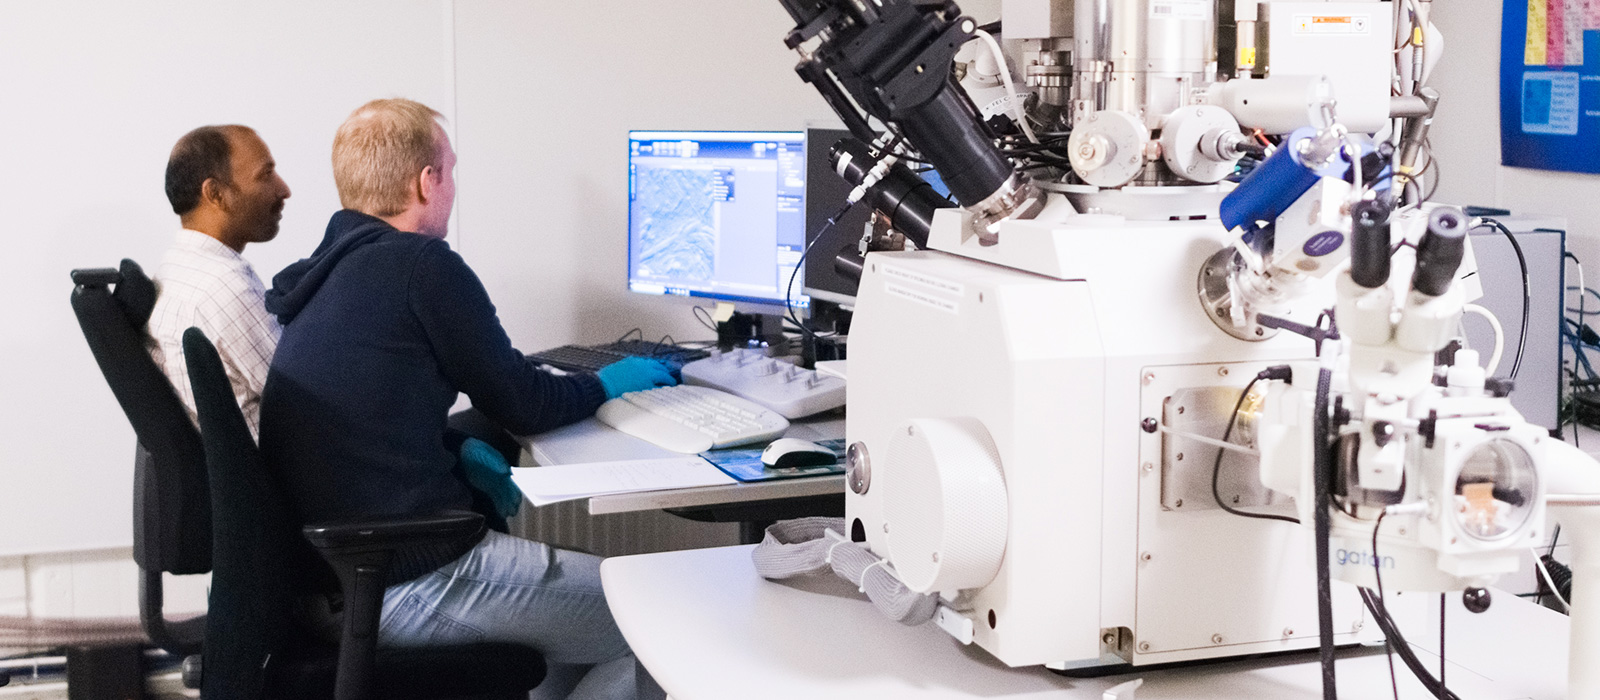 Researchers working with the electron microscopy